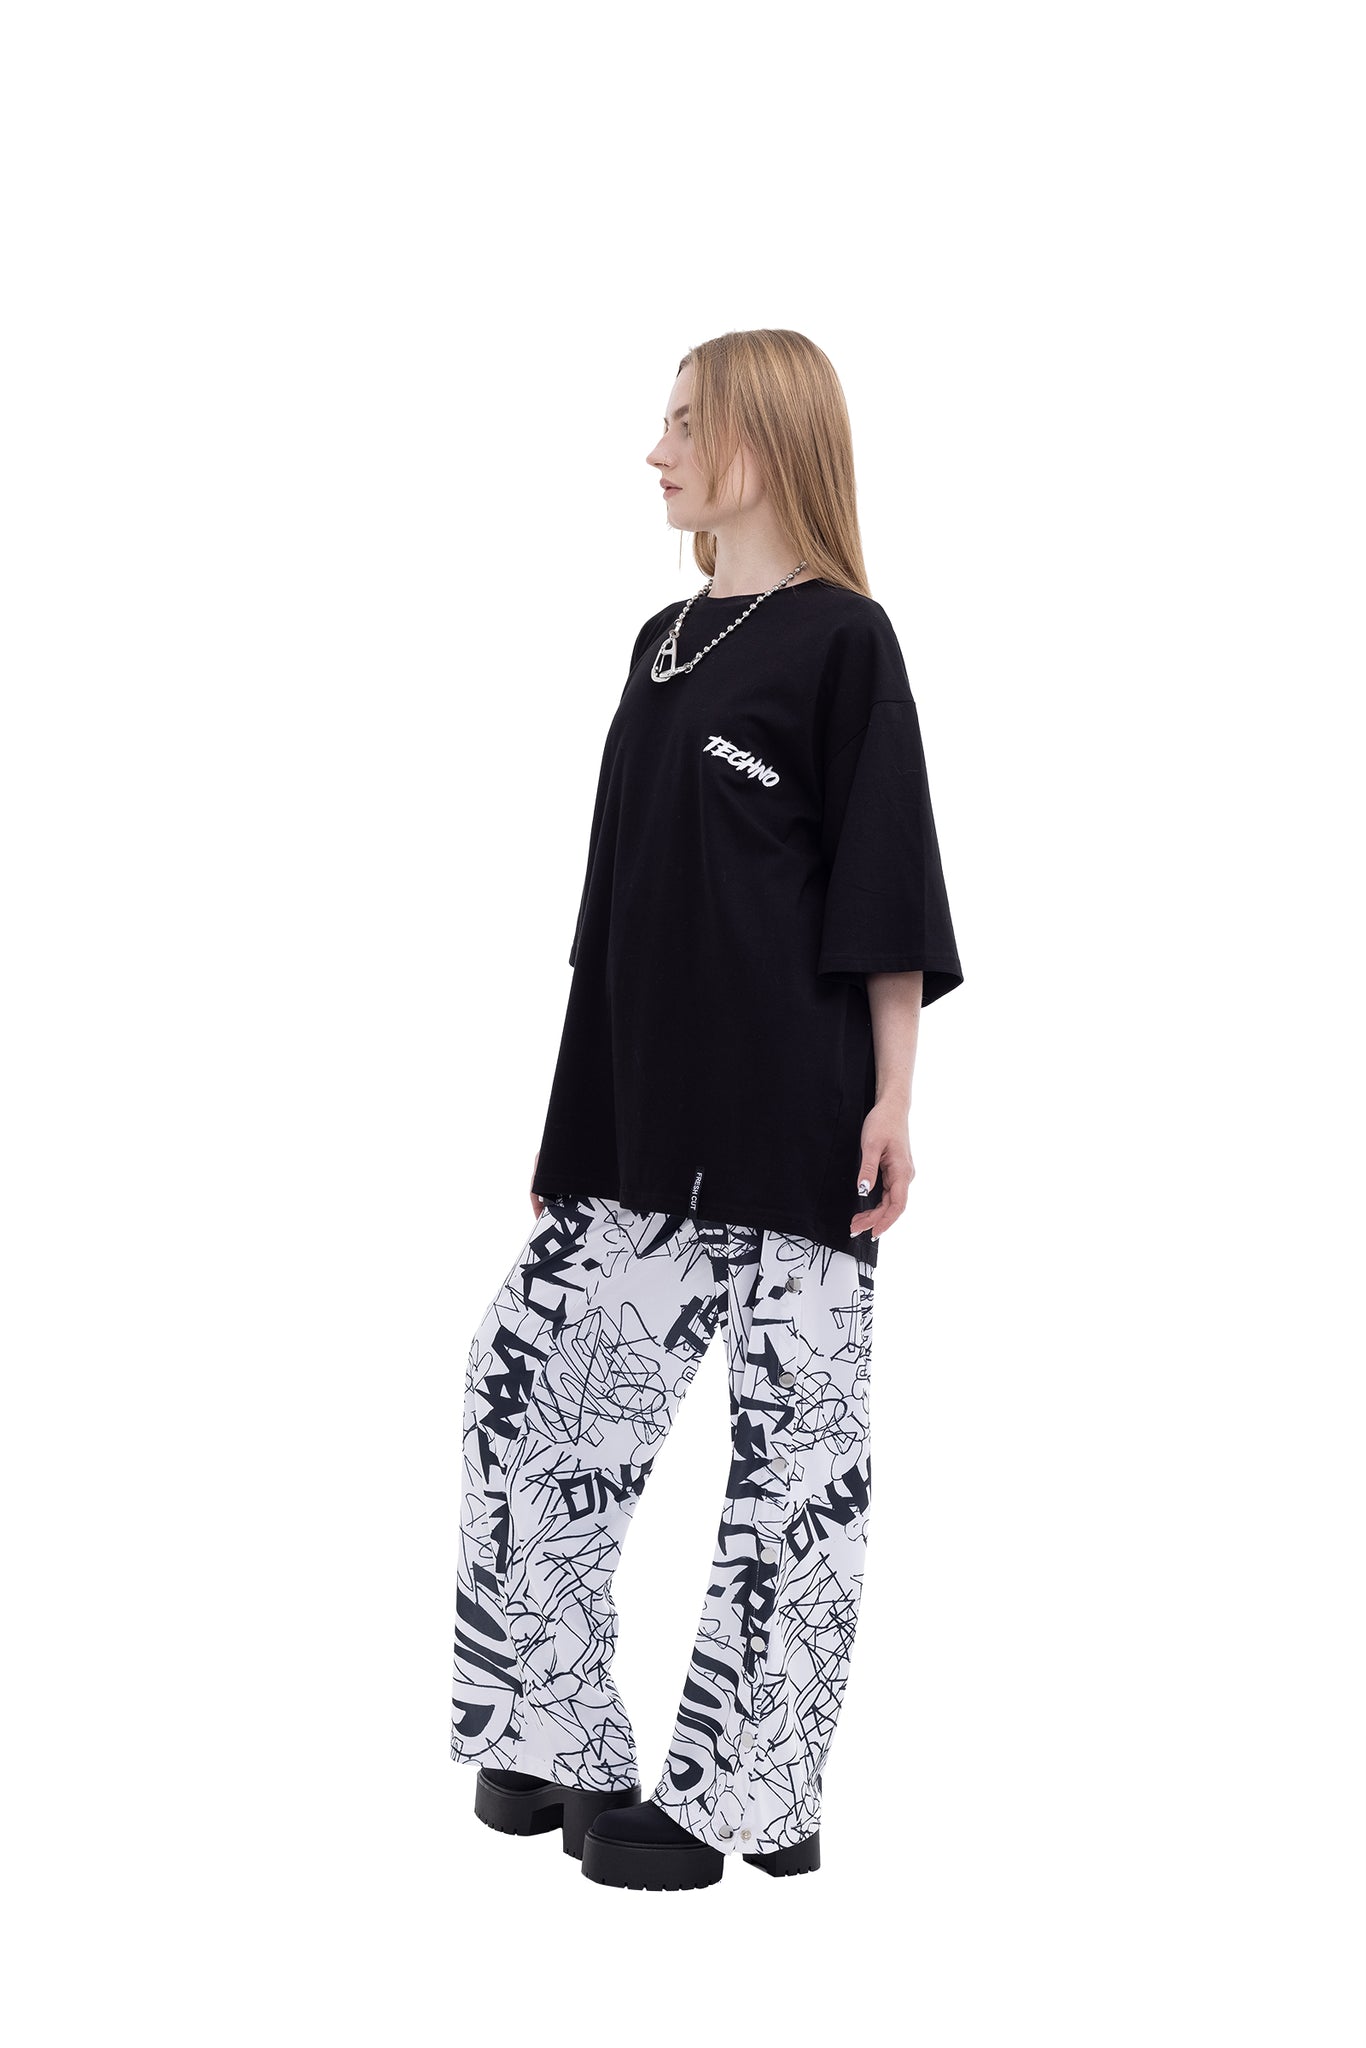 Vaccinated Unisex Oversized T-shirt with reflective details